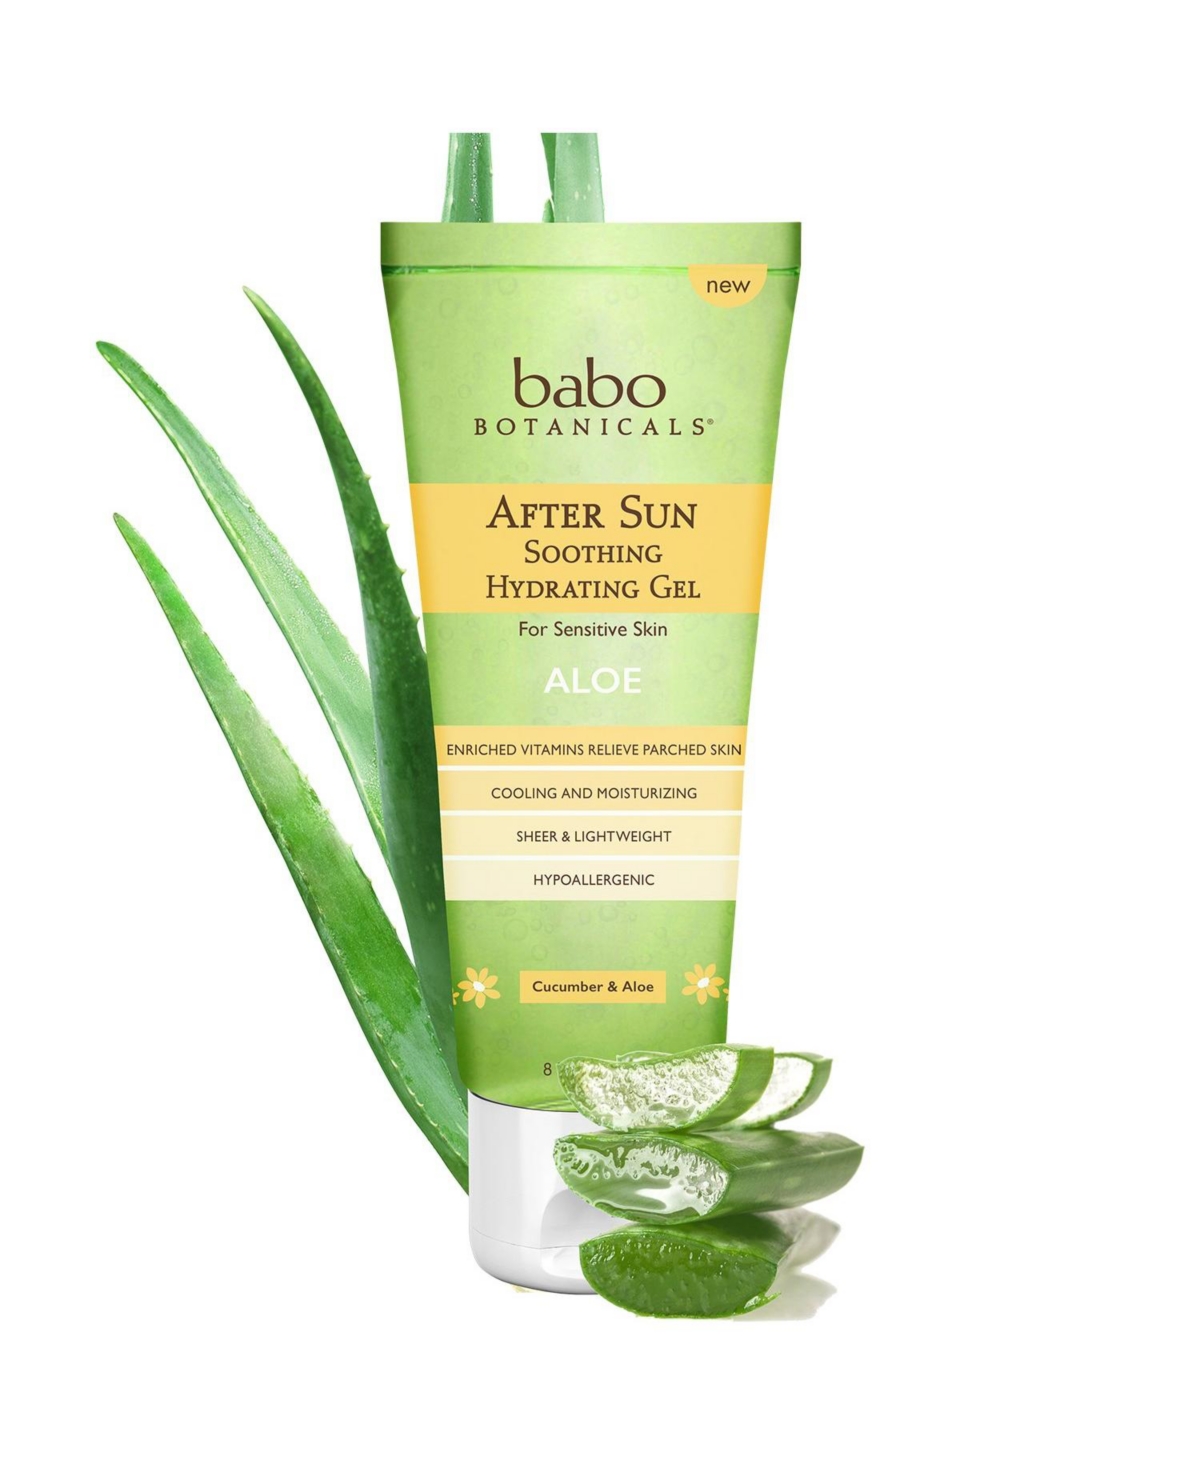 After Sun Soothing Gel - 1 Each - 8 Oz